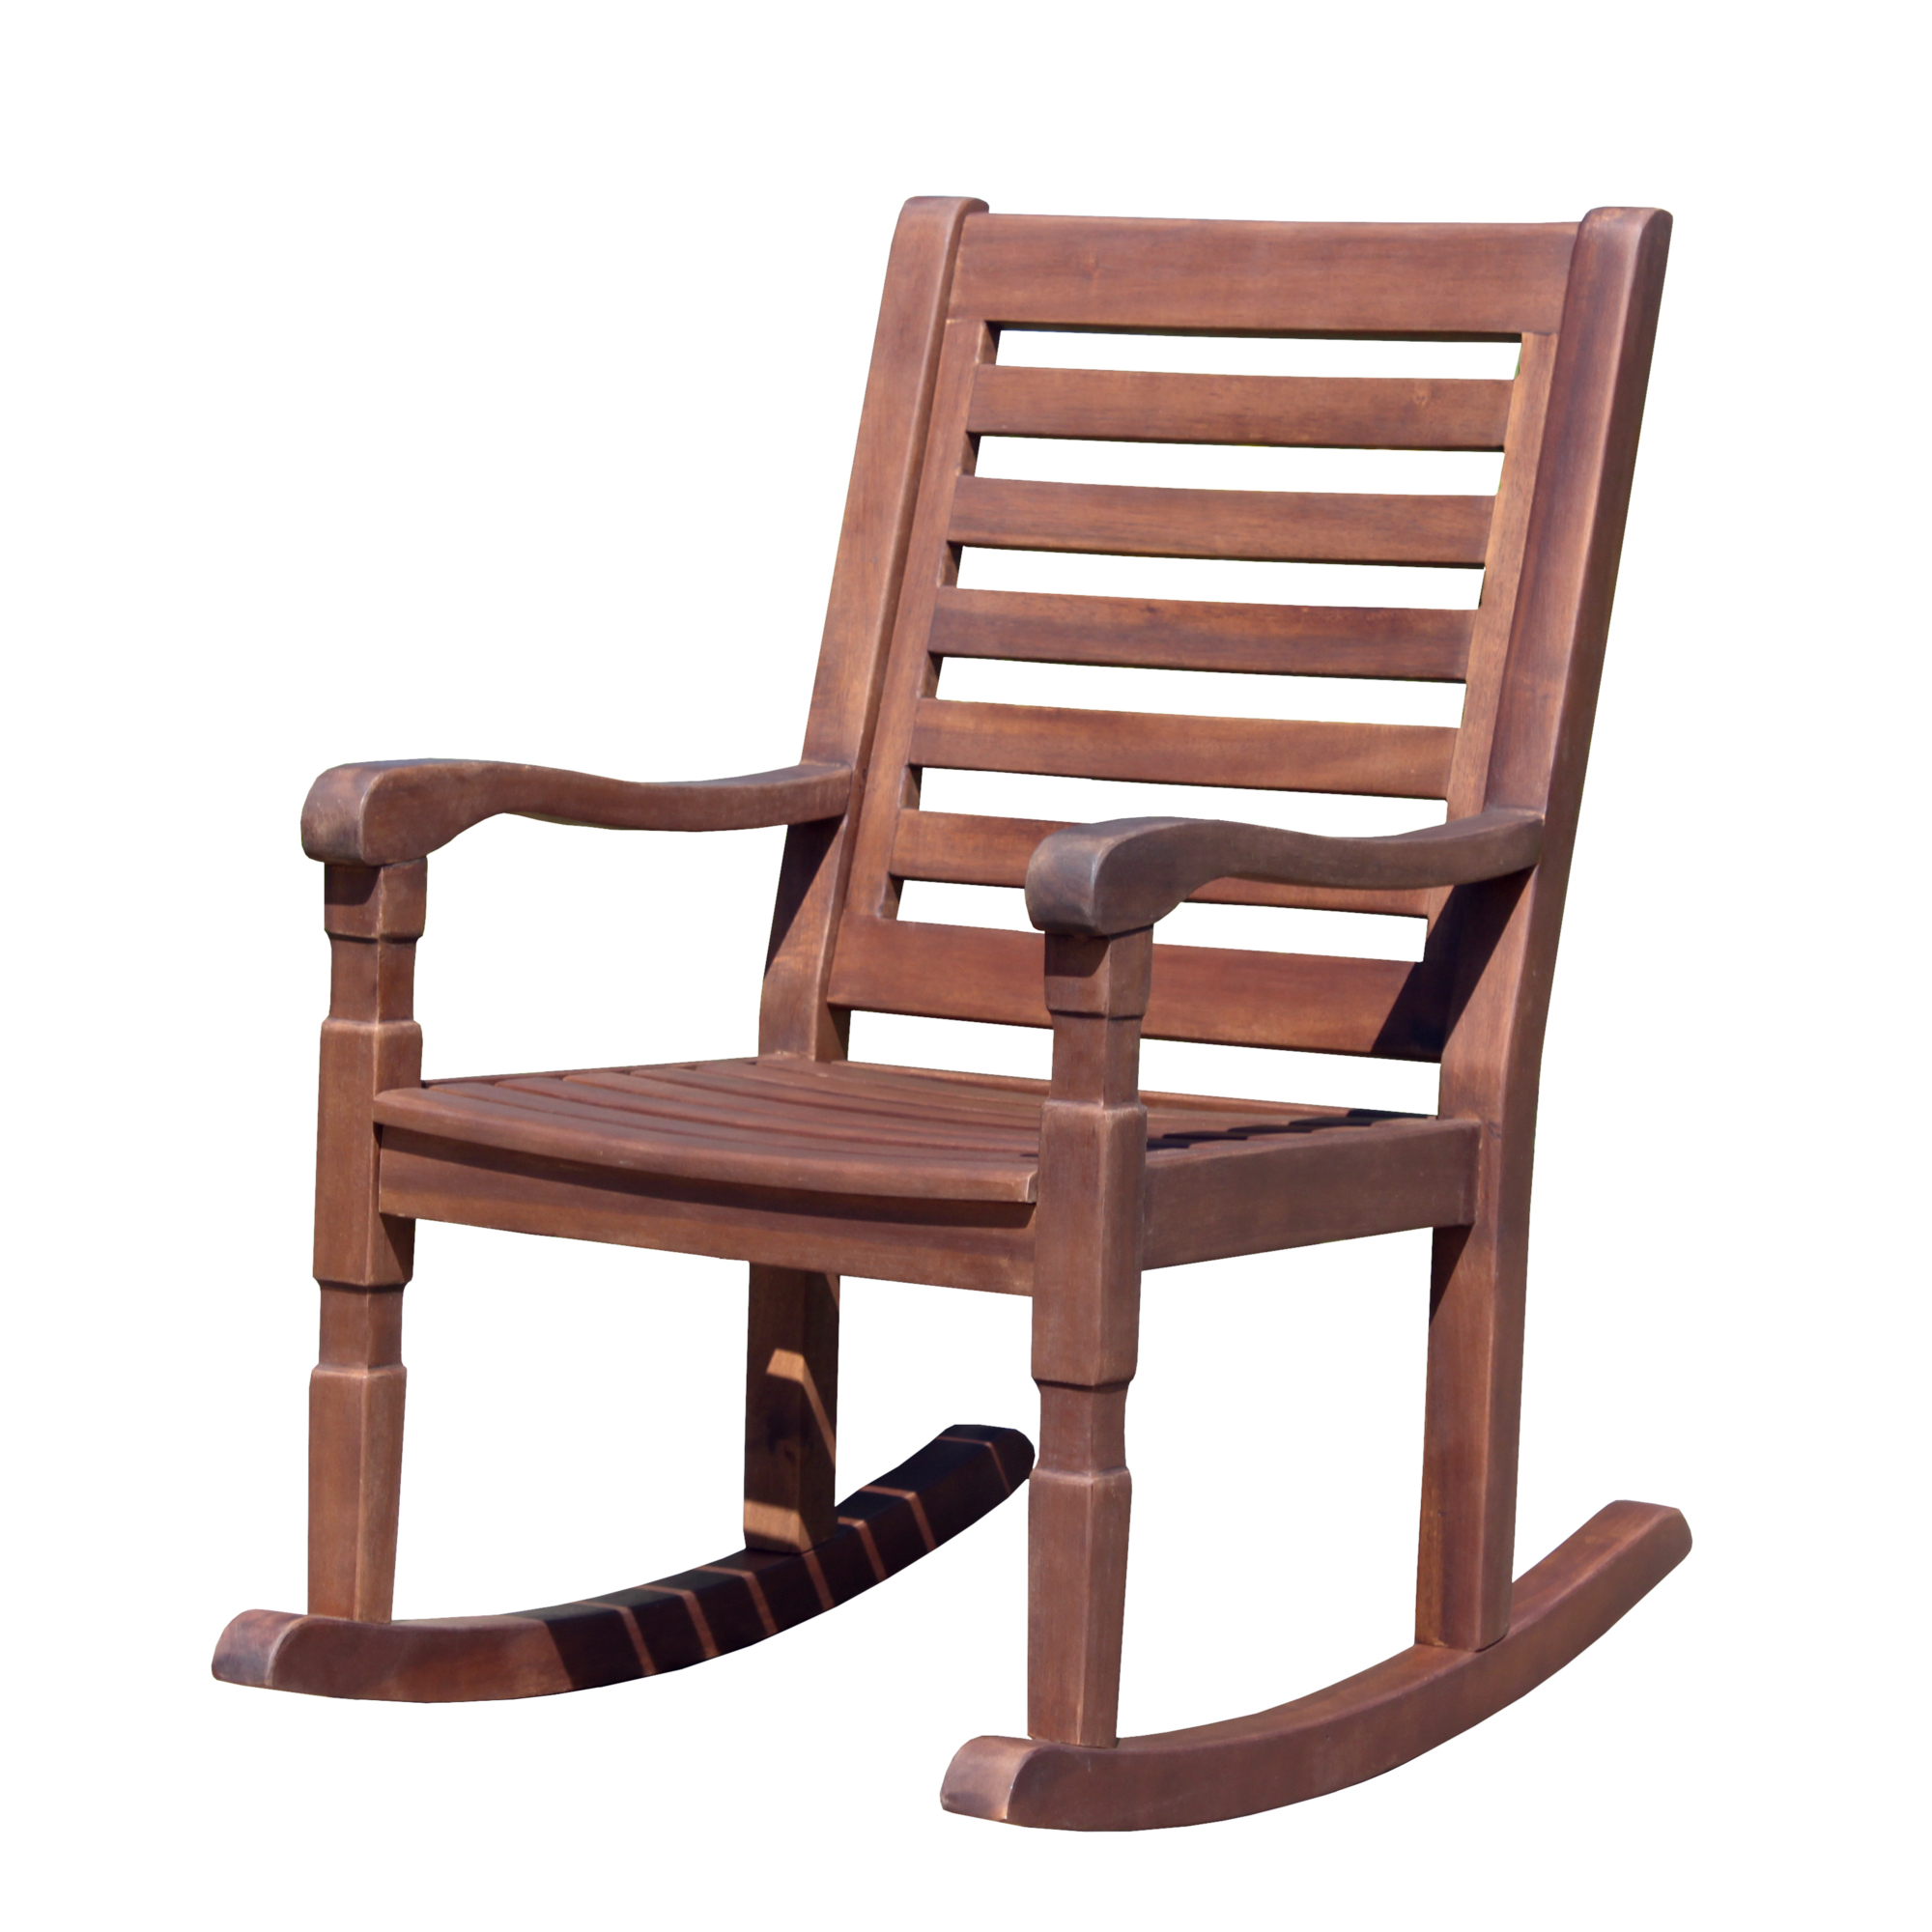 Merry Products, Nantucket Kidâs Rocking Chair, Primary Color Natural, Material Wood, Width 14.02 in, Model ROK0170114910